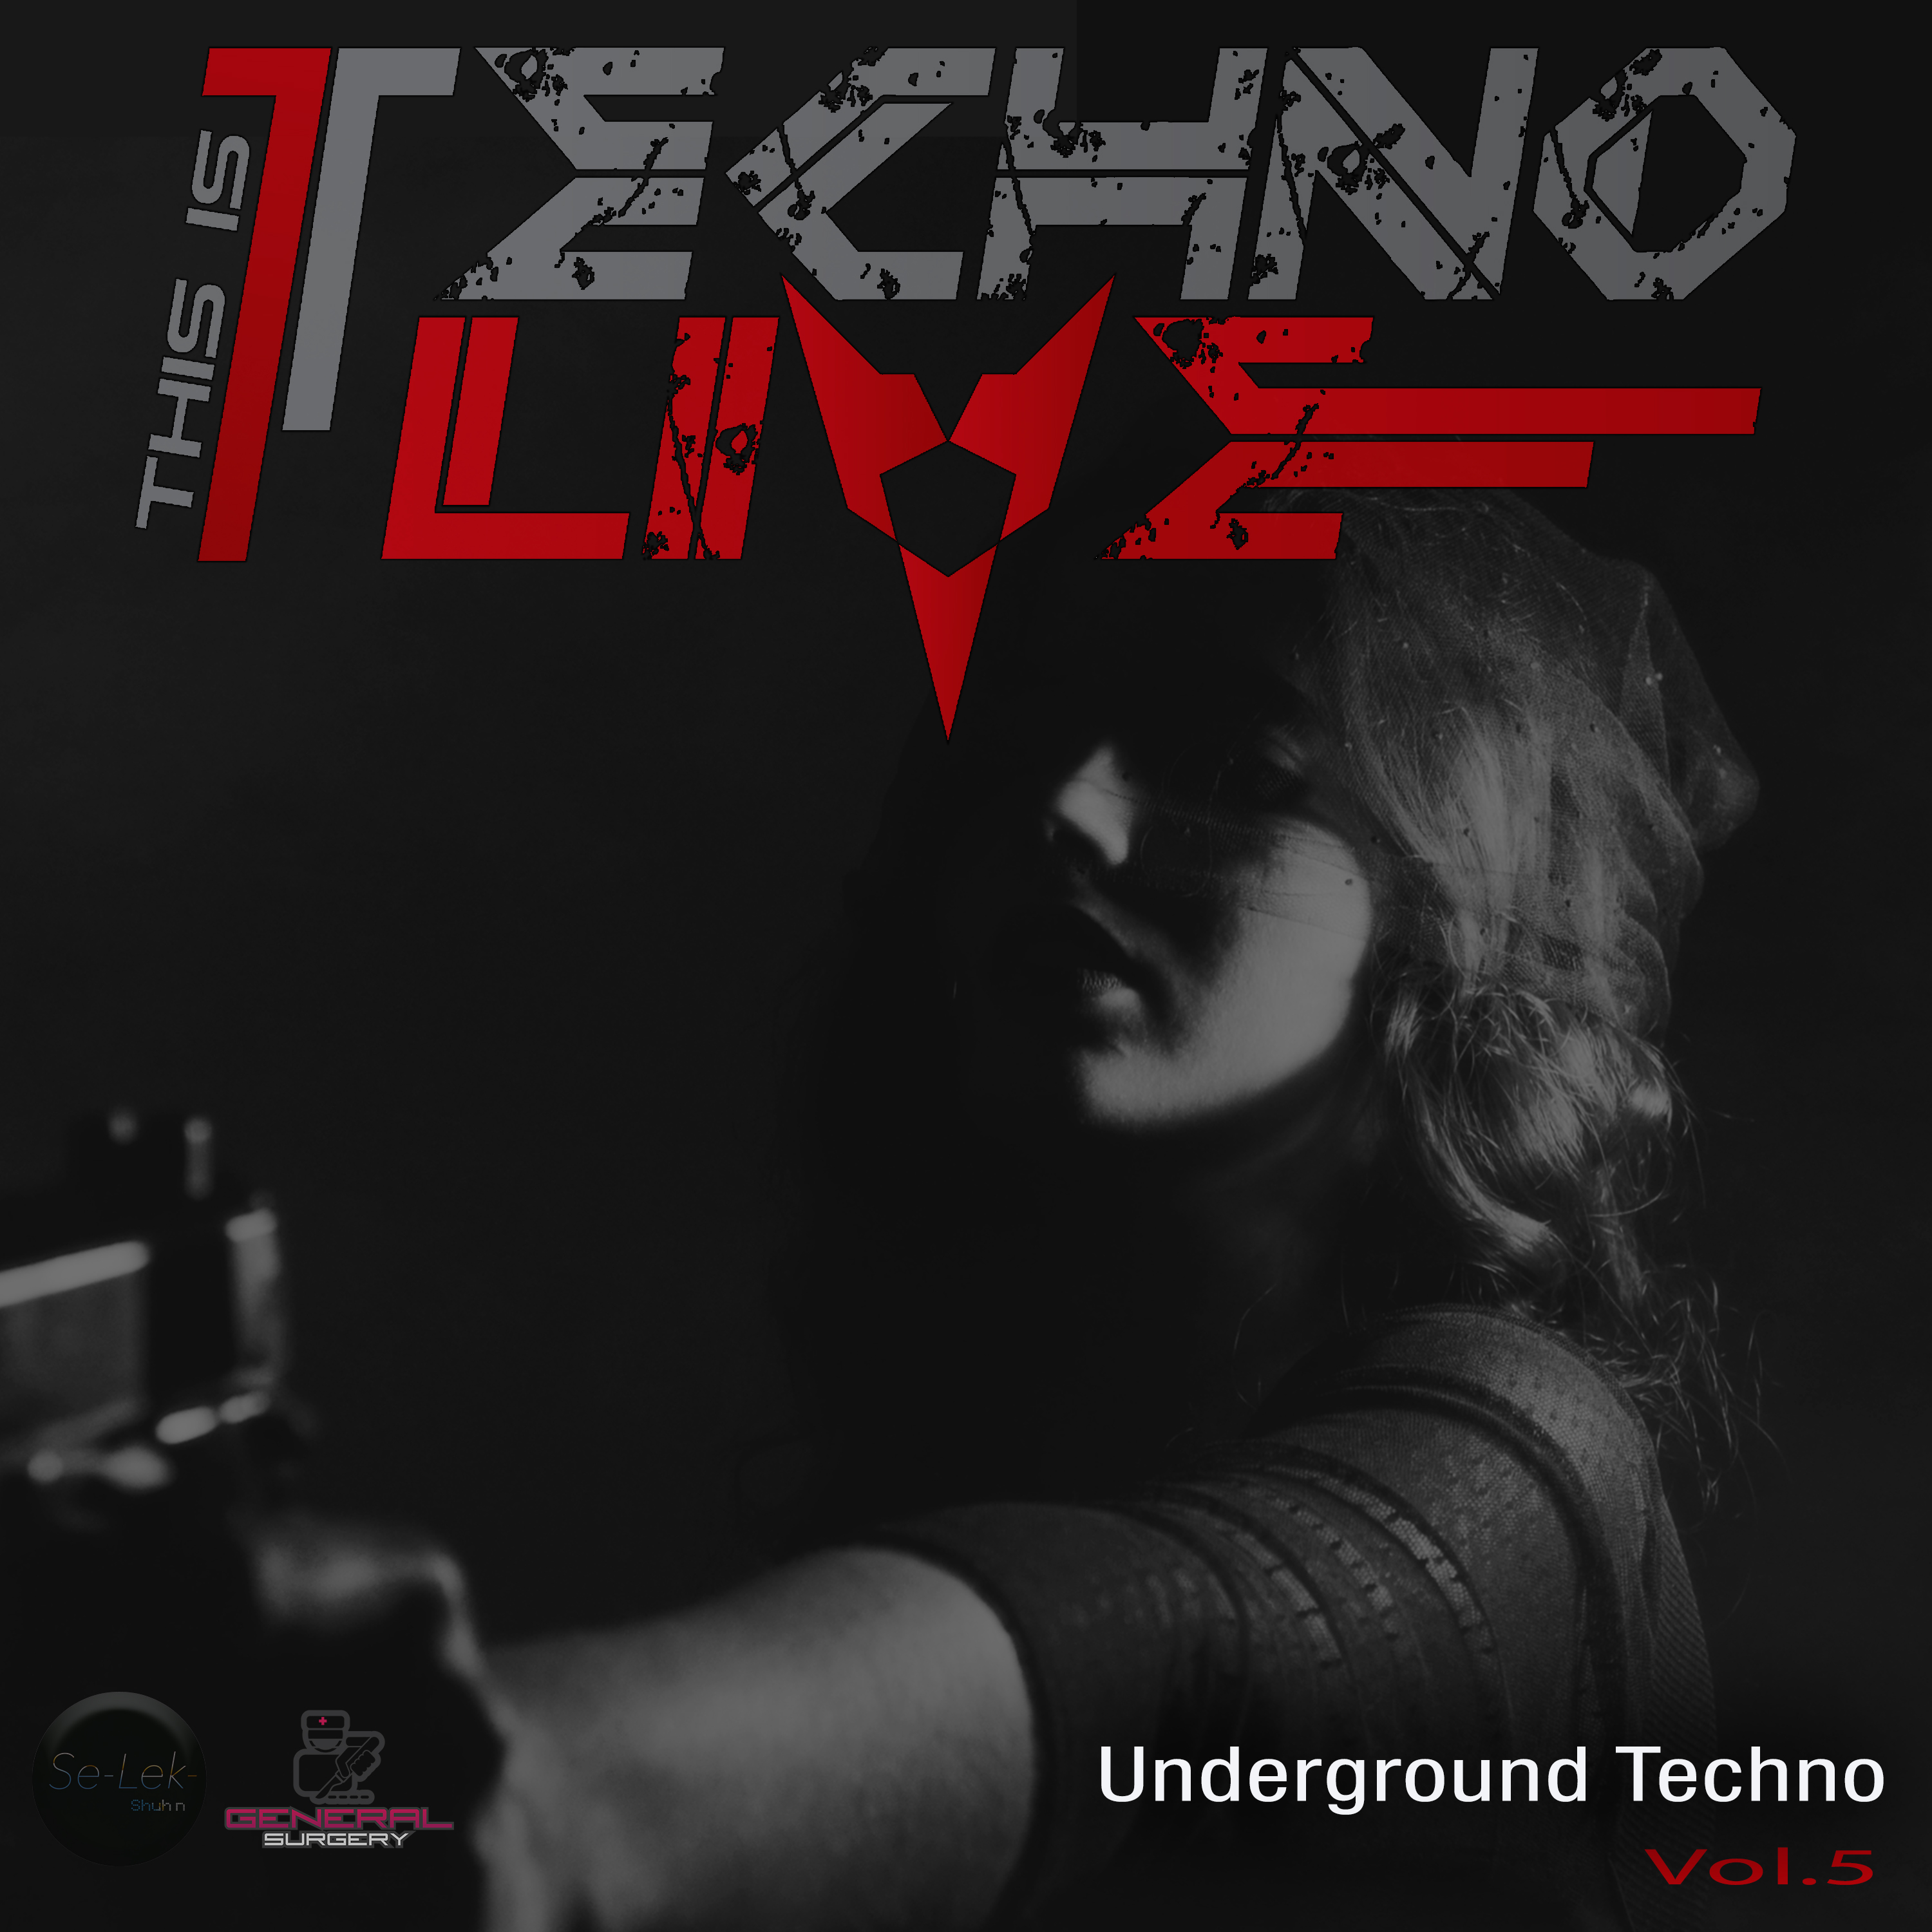 This Is Techno Live Vol.5 [General Surgery]